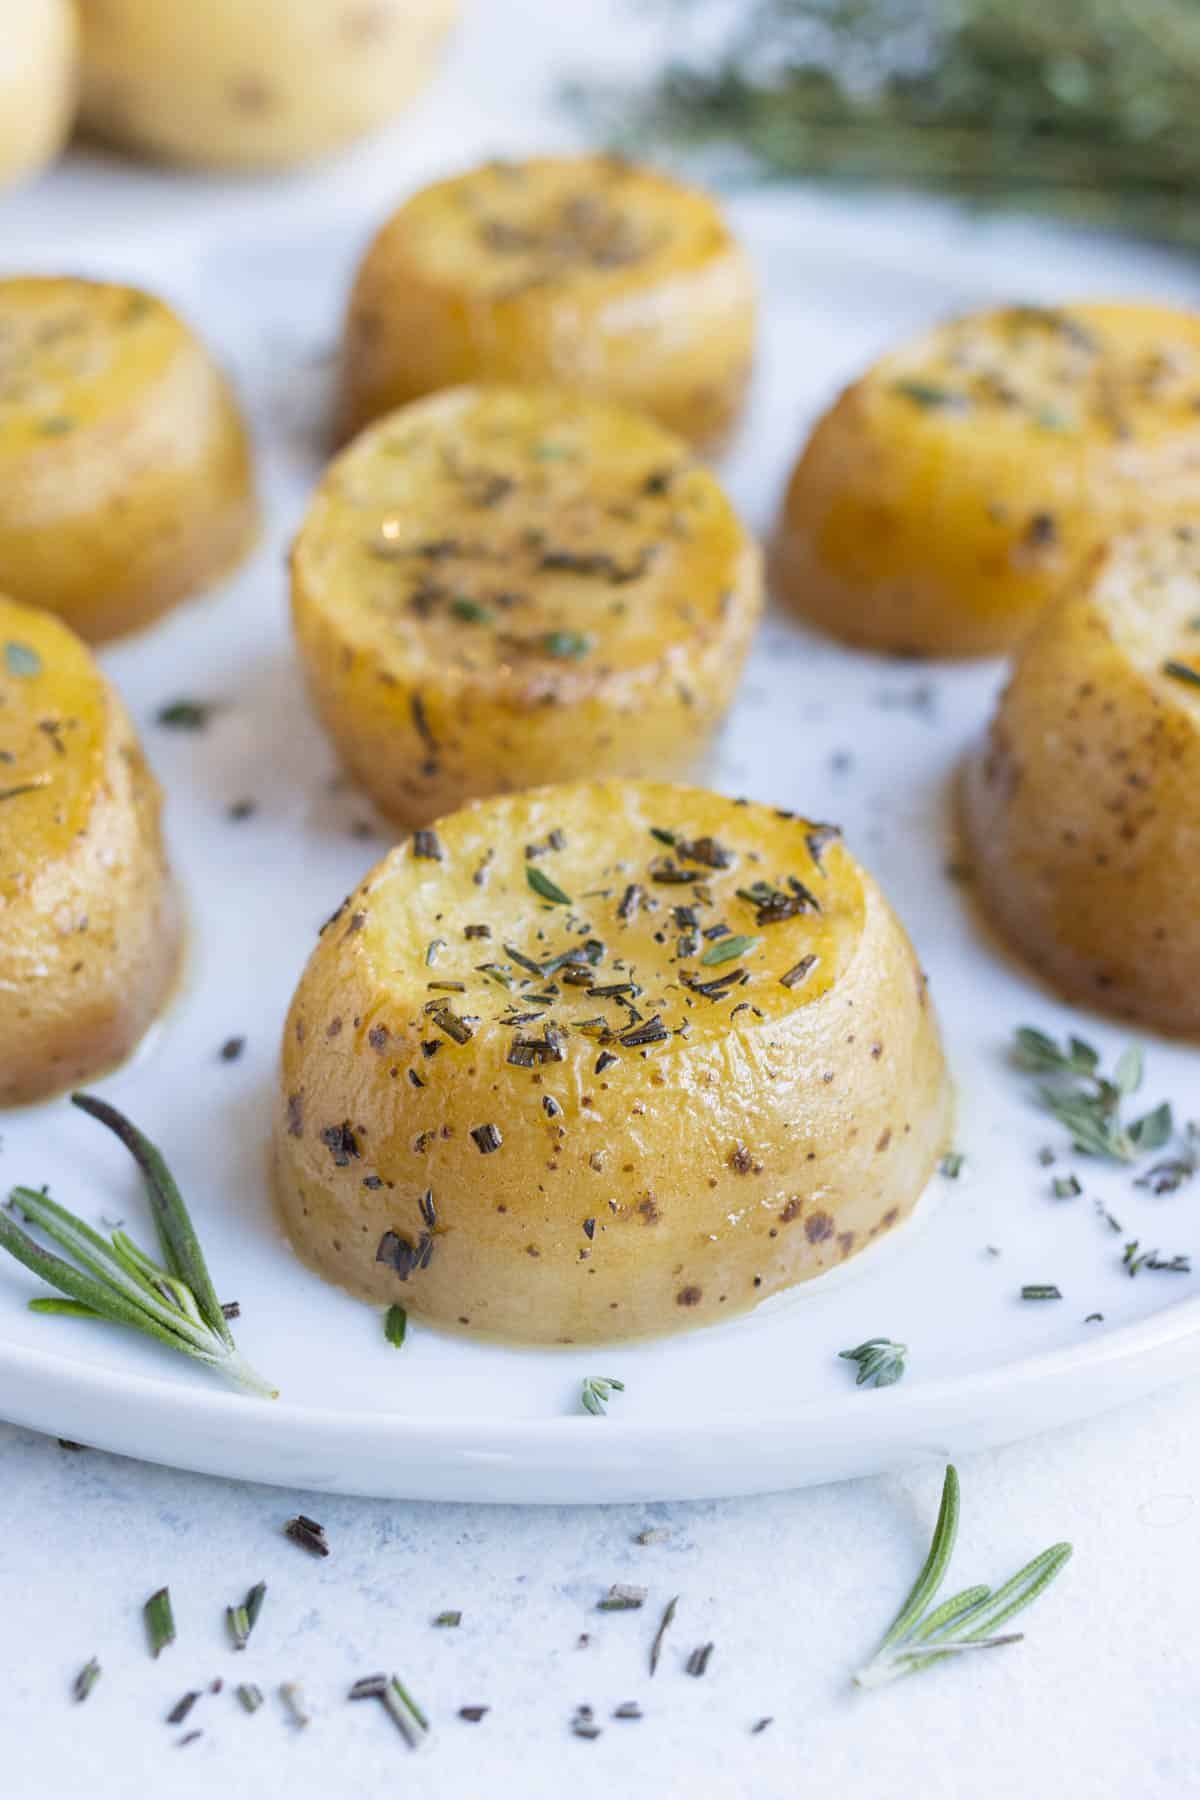 Melting potatoes are an easy side dish for holidays.